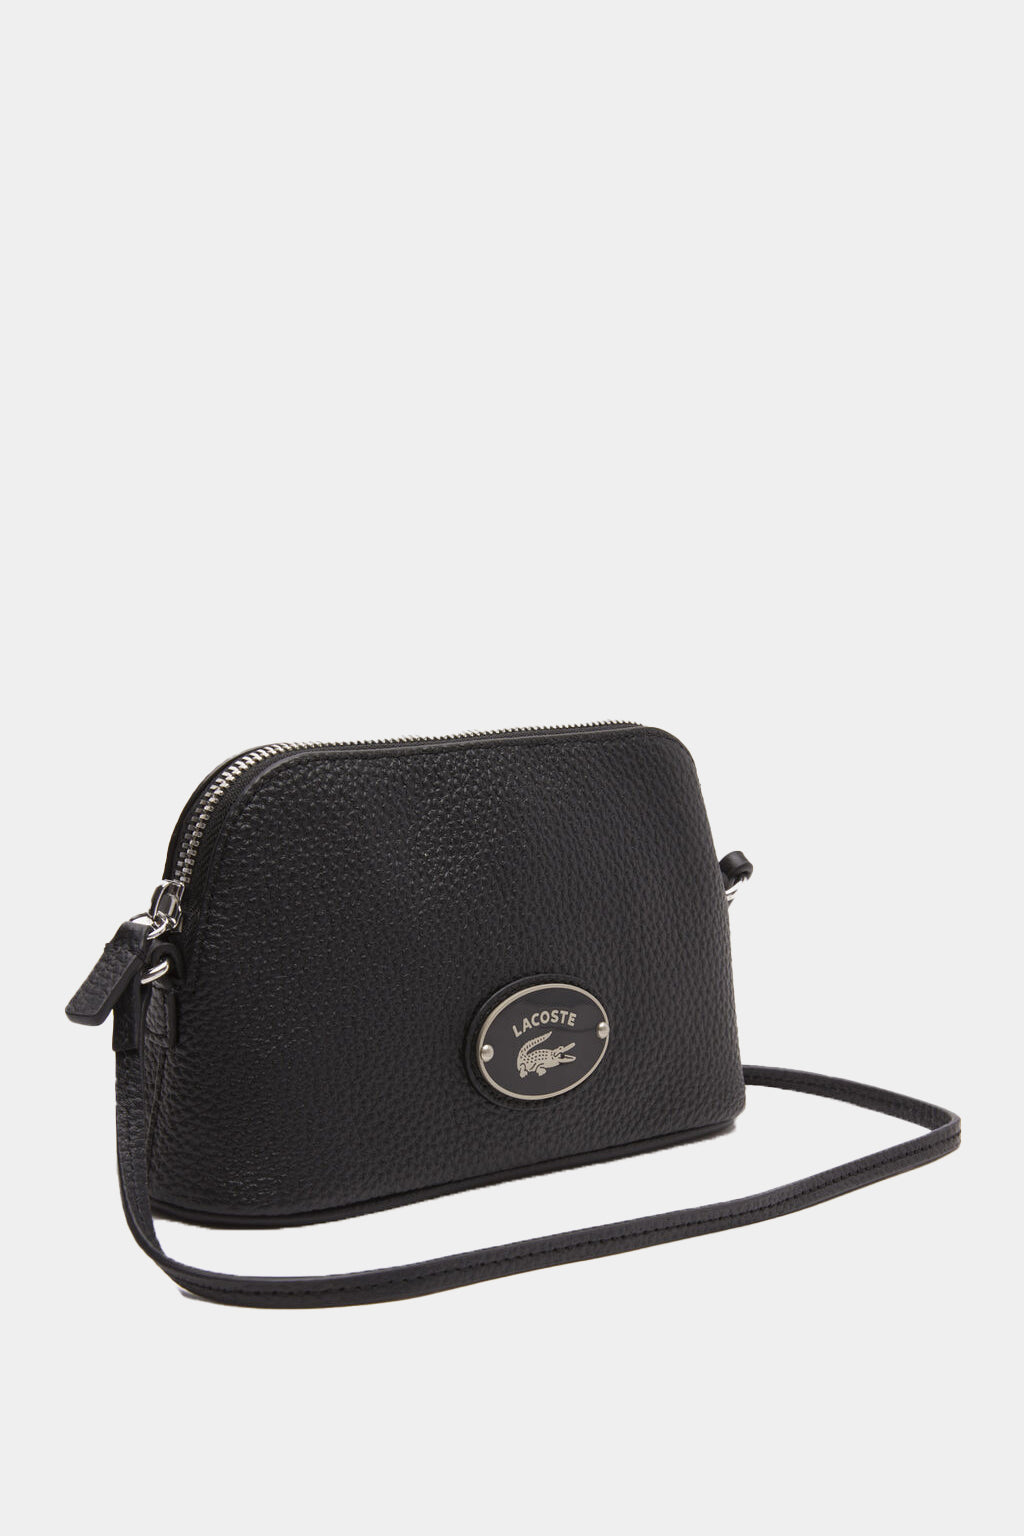 Lacoste - Grained Leather Dome Crossover Bag